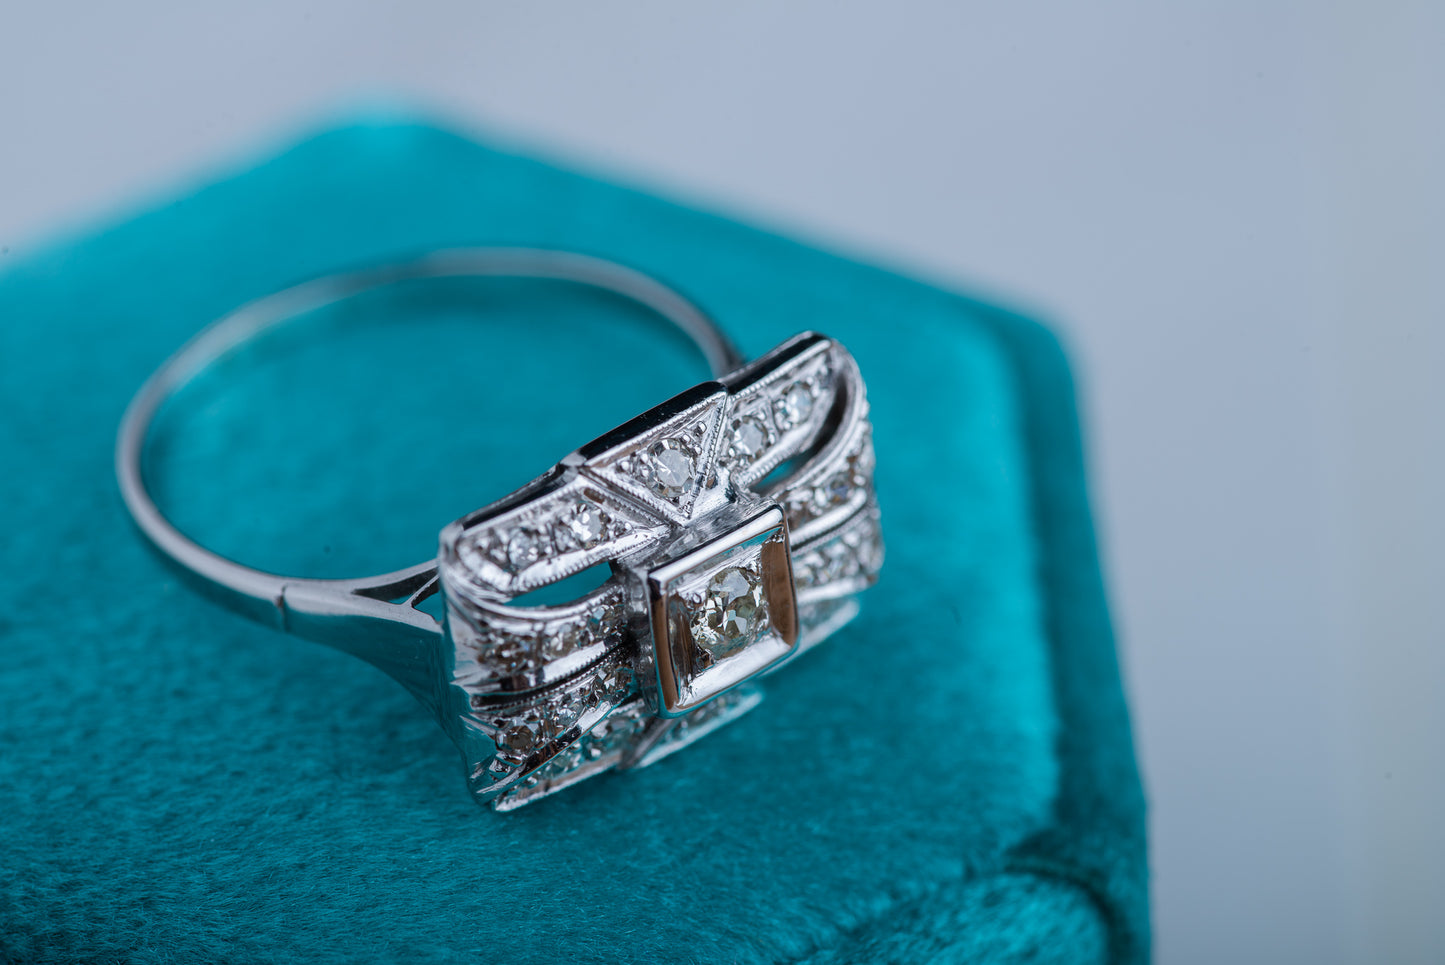 Art Deco Diamond East to West Ring